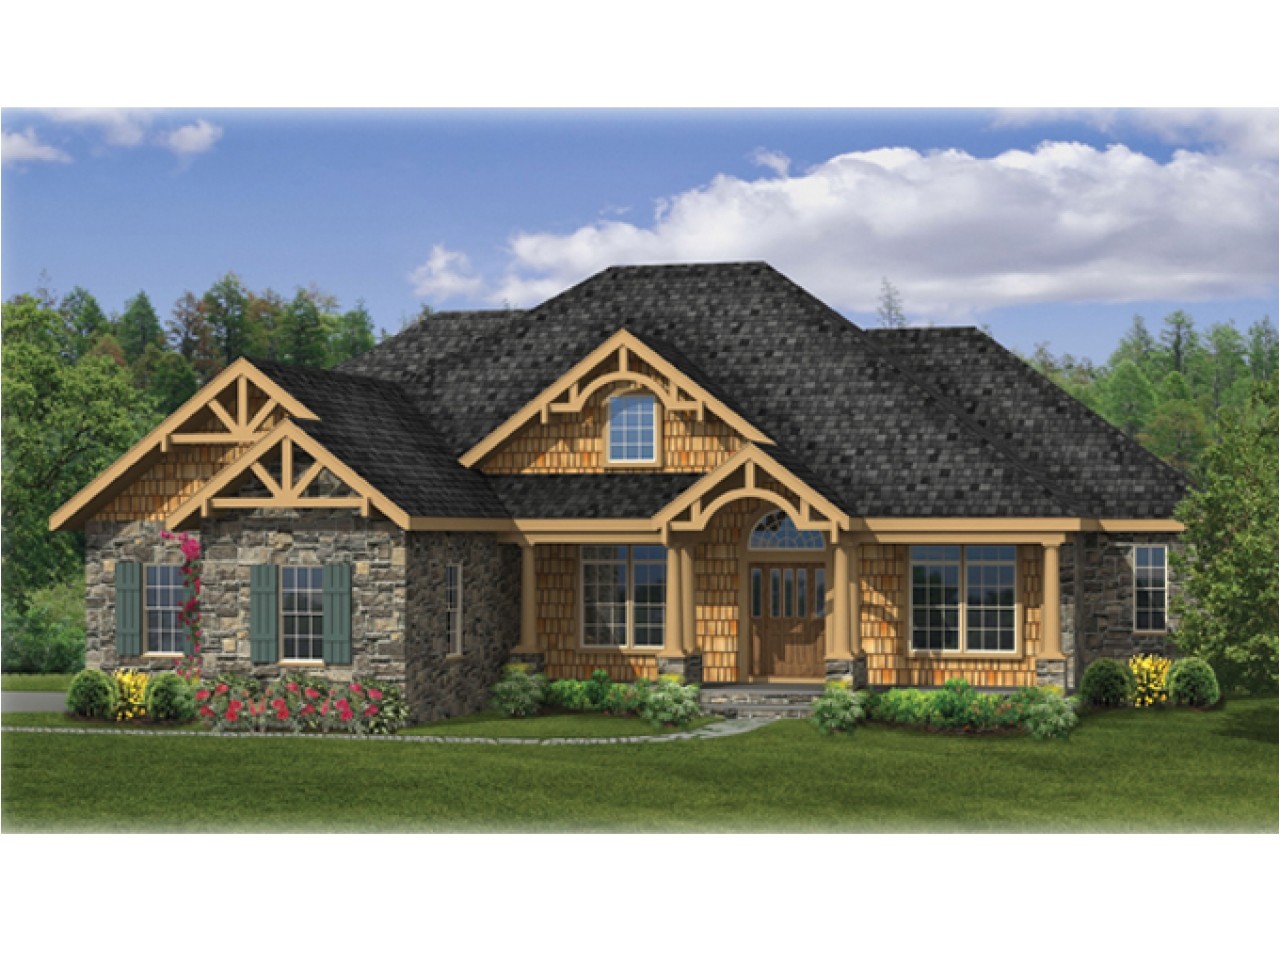 9620caff91f0ddec craftsman ranch house plans craftsman house plans ranch style